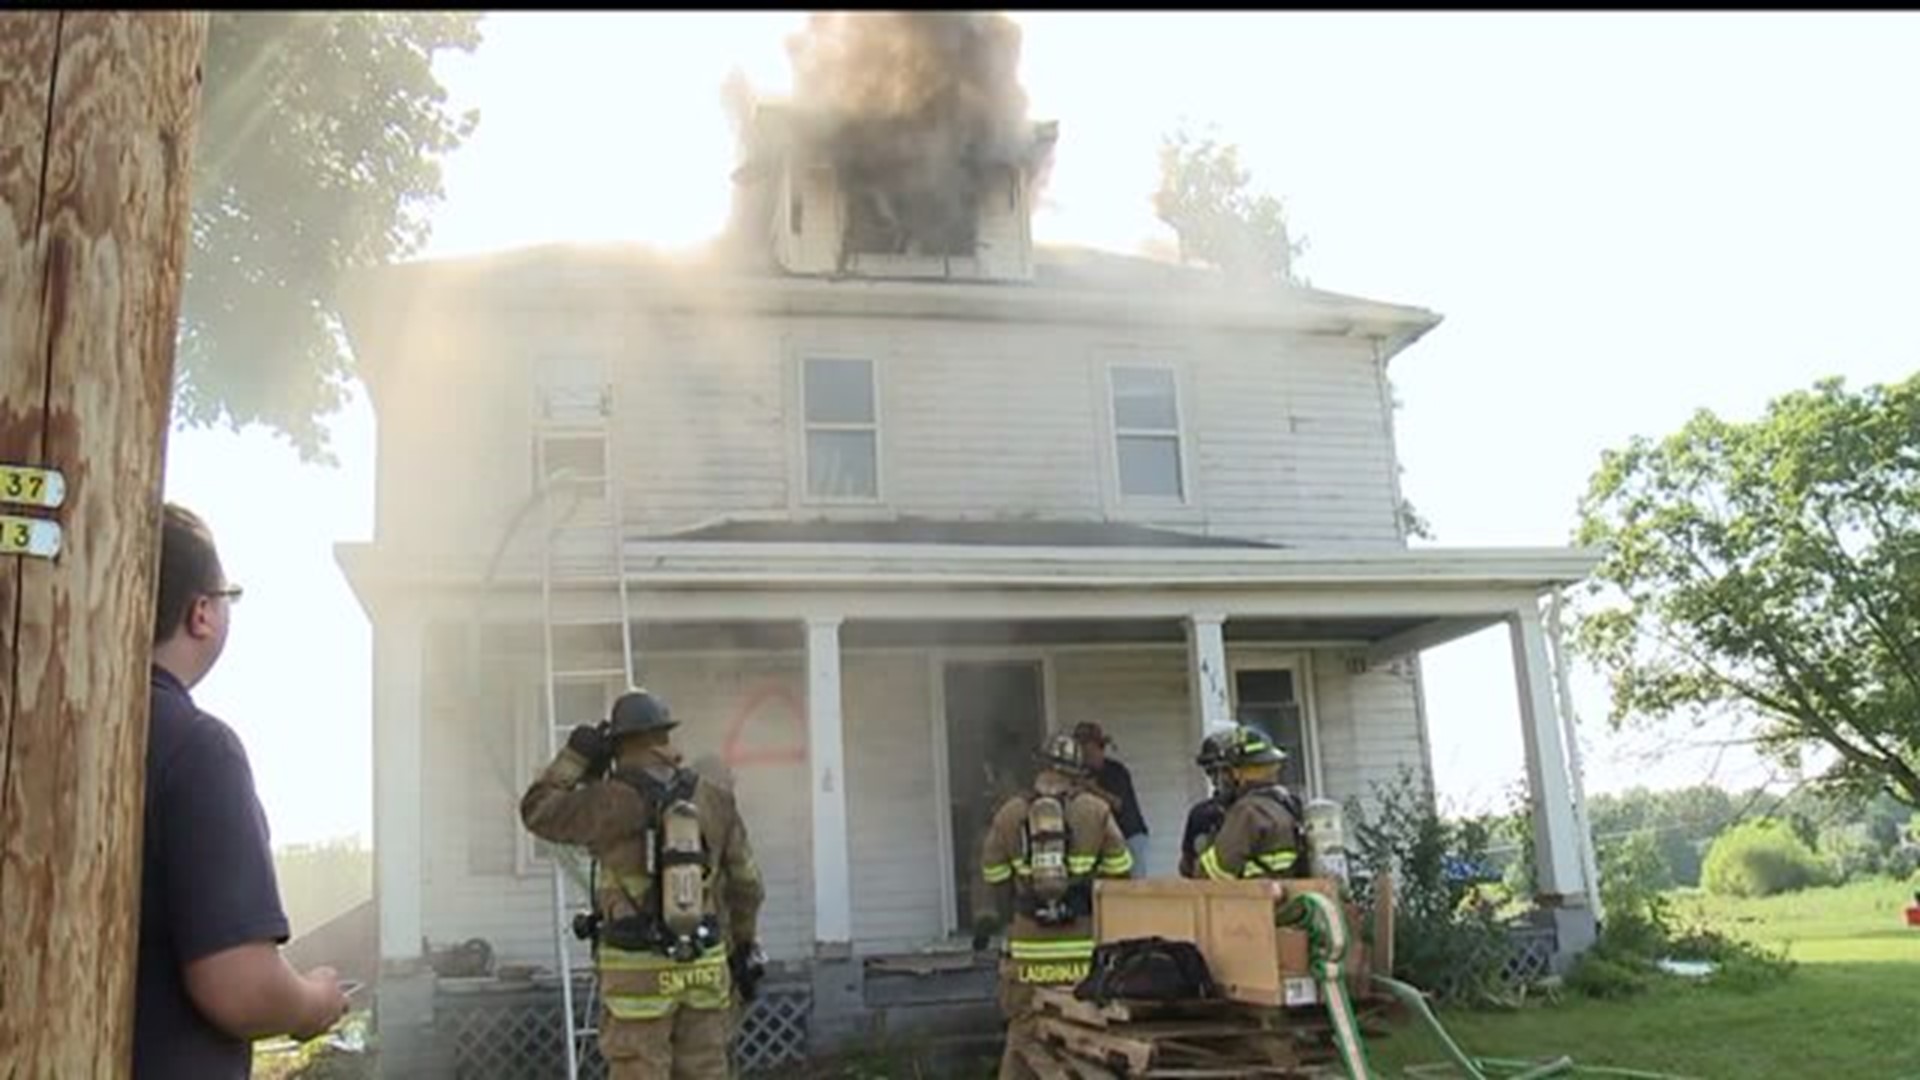 Firefighters get rare training opportunity